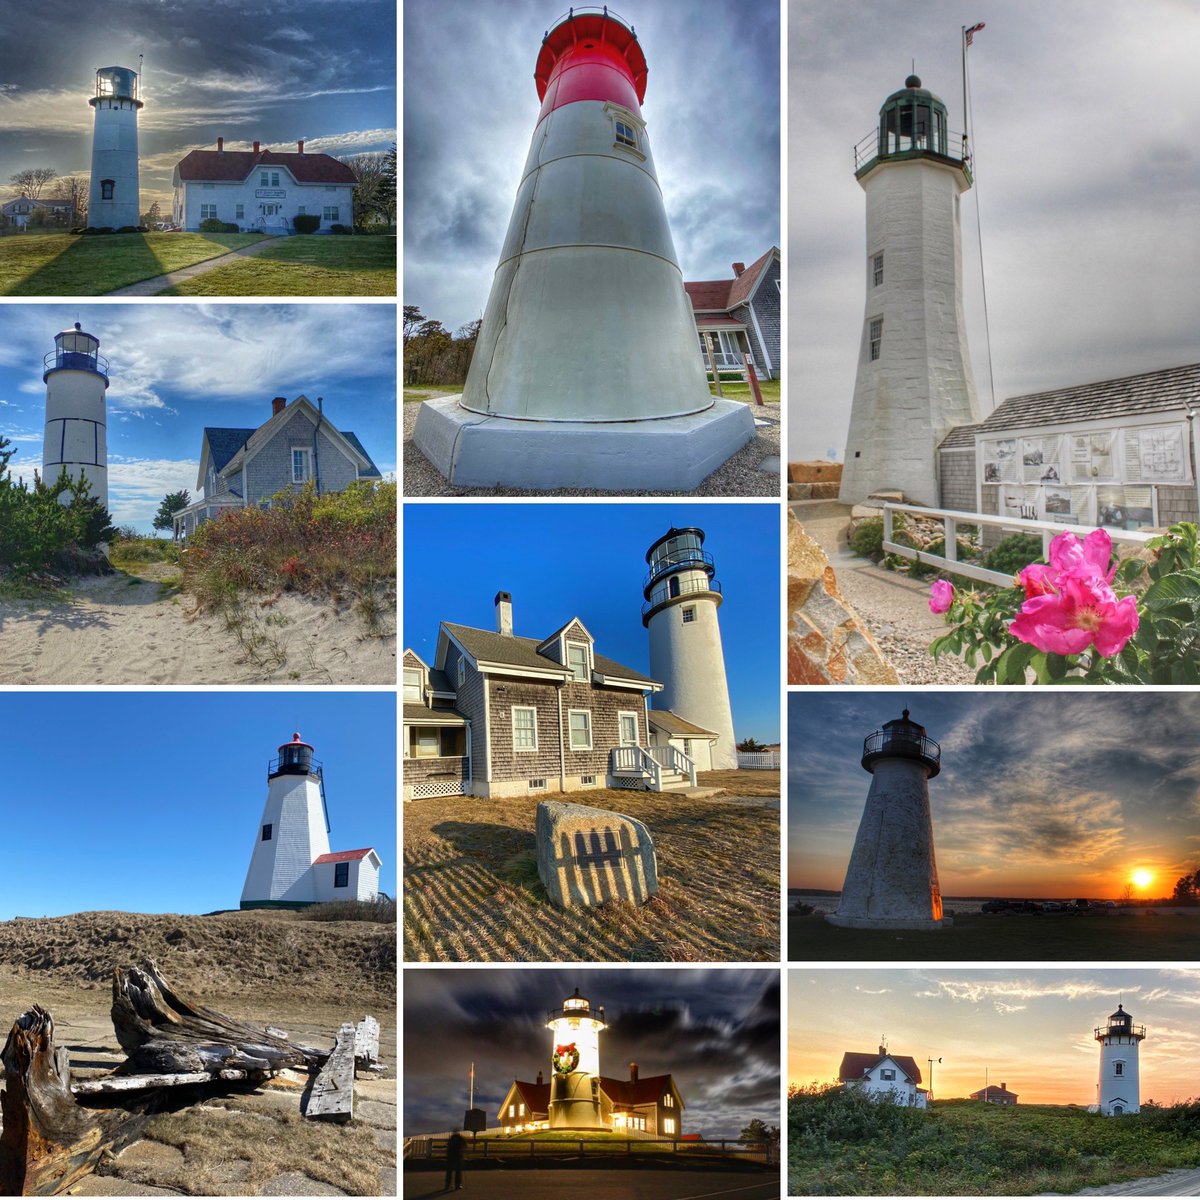 Happy National Lighthouse Day. Here are some of my favorites from Massachusetts. Have you been to any of these? #NationalLighthouseDay #capecod @VisitMA @VisitCapeCod @travelchannel @HISTORY @yankeemagazine @500px